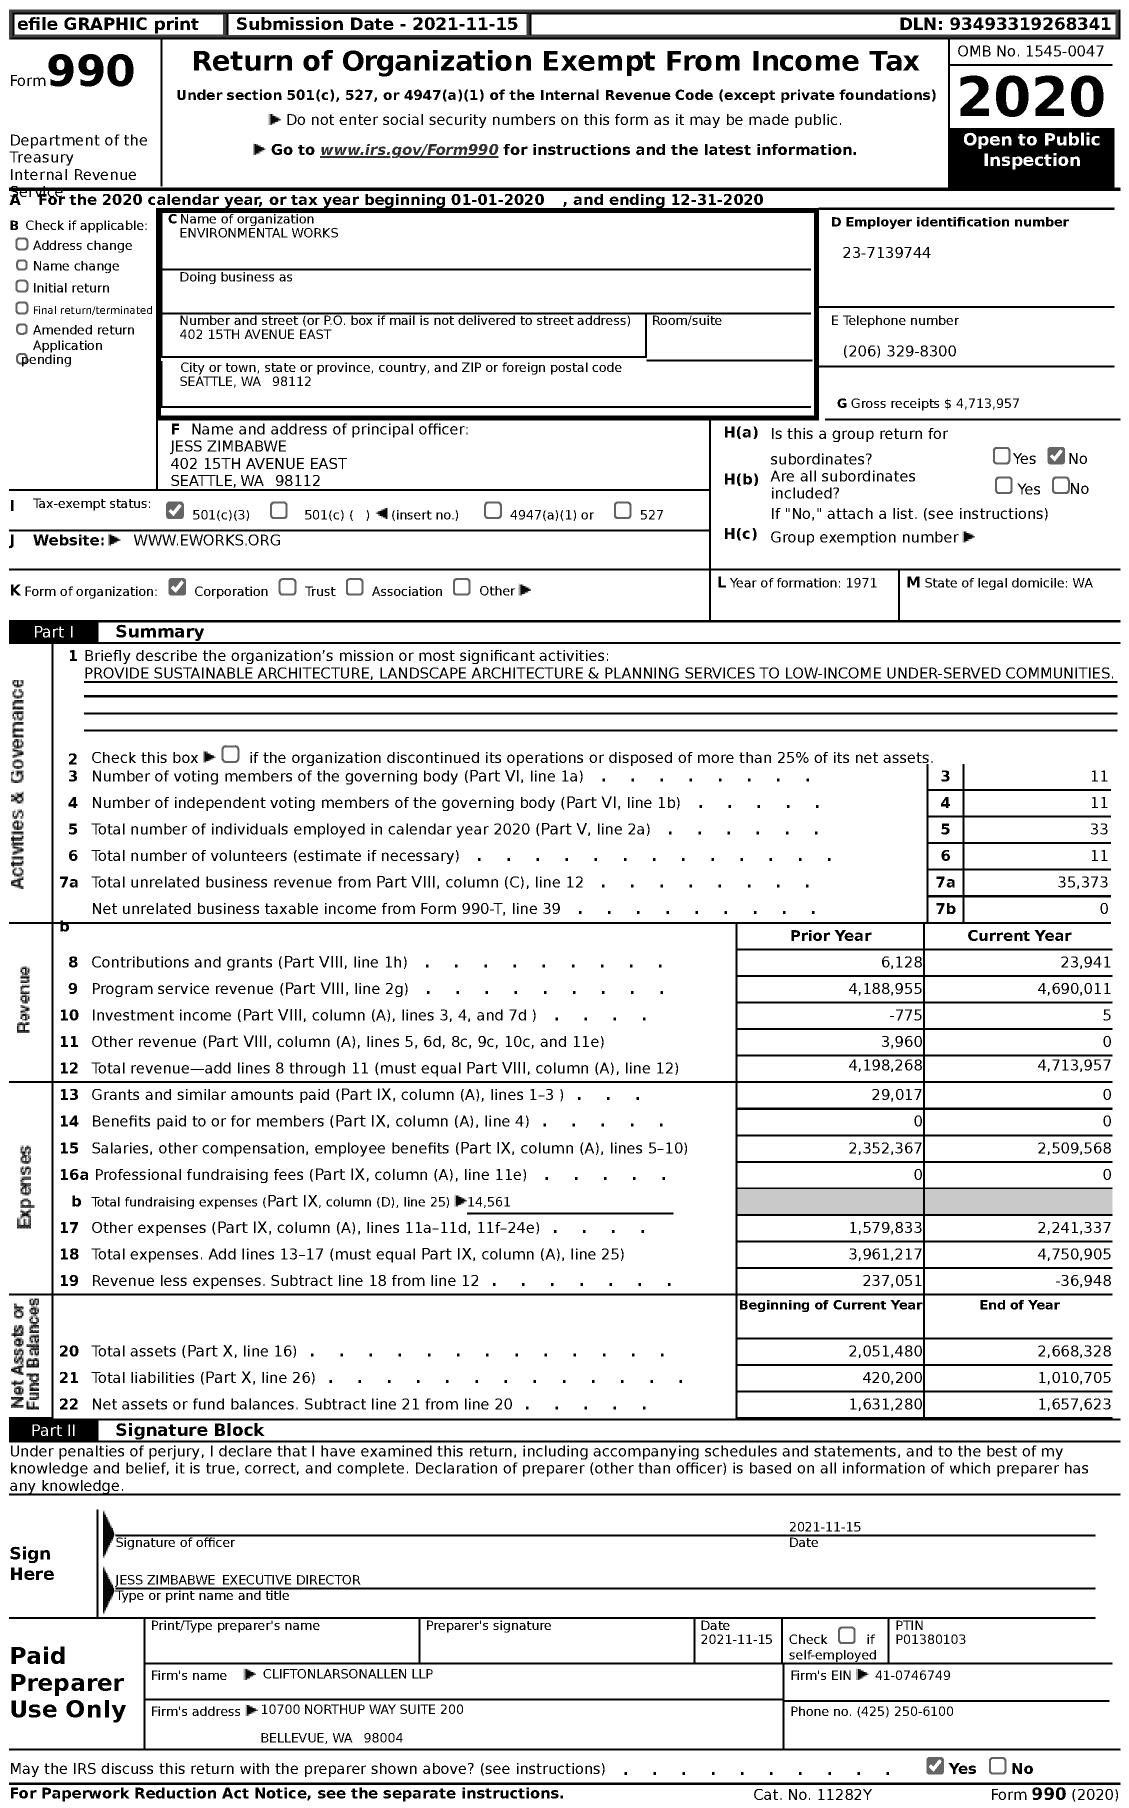 Image of first page of 2020 Form 990 for environmental WORKS (EW)